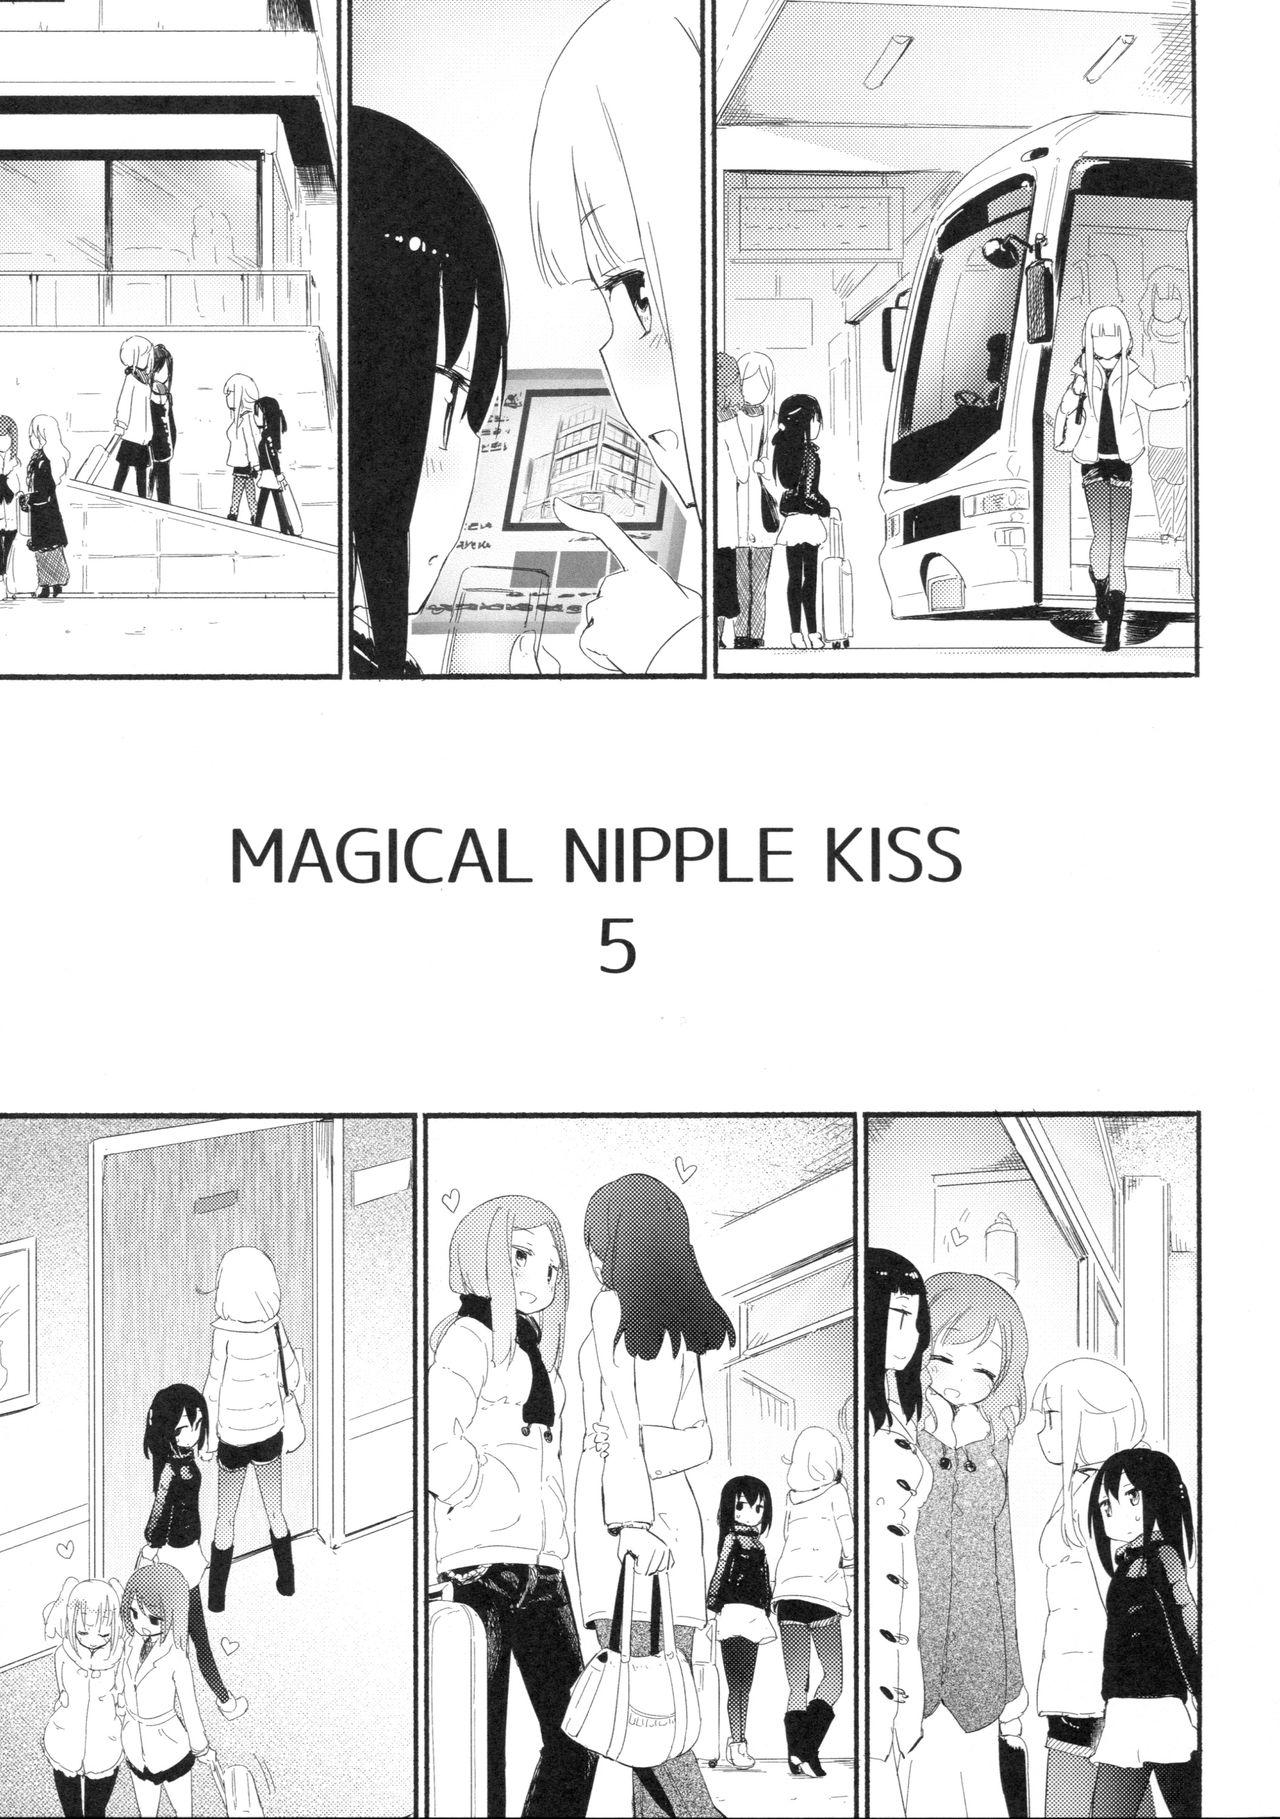 Coeds Magical Nipple Kiss 5 Yanks Featured - Page 4